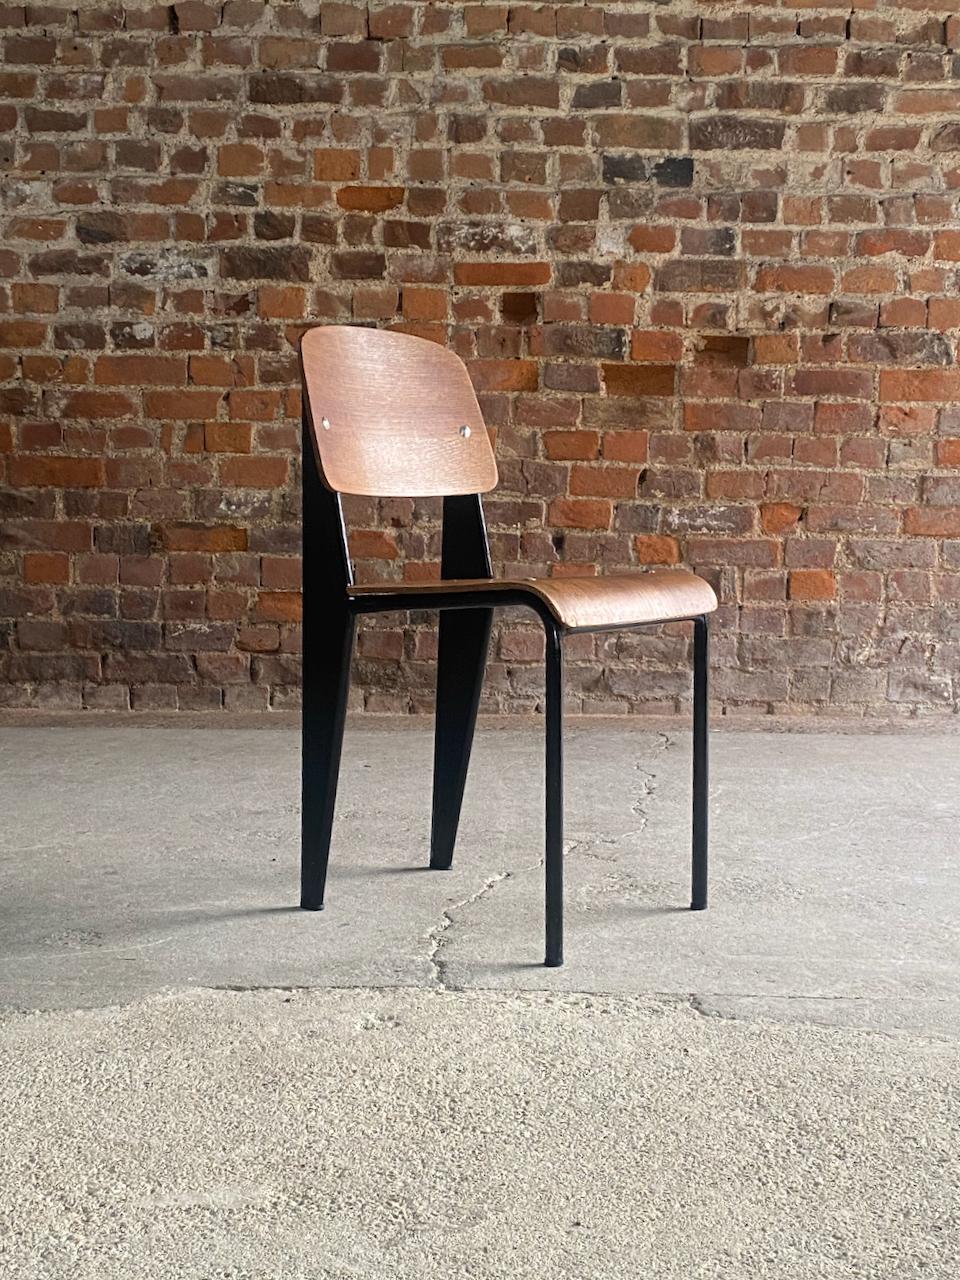 Jean Prouvé Model 305 Black Standard Chair by Atelier Prouvé Circa 1950

Rare and important mid century Jean Prouvé Model 305 Black Standard Chair by Atelier Prouve Circa 1950, in lacquered semi steel and plywood, chair in original condition,